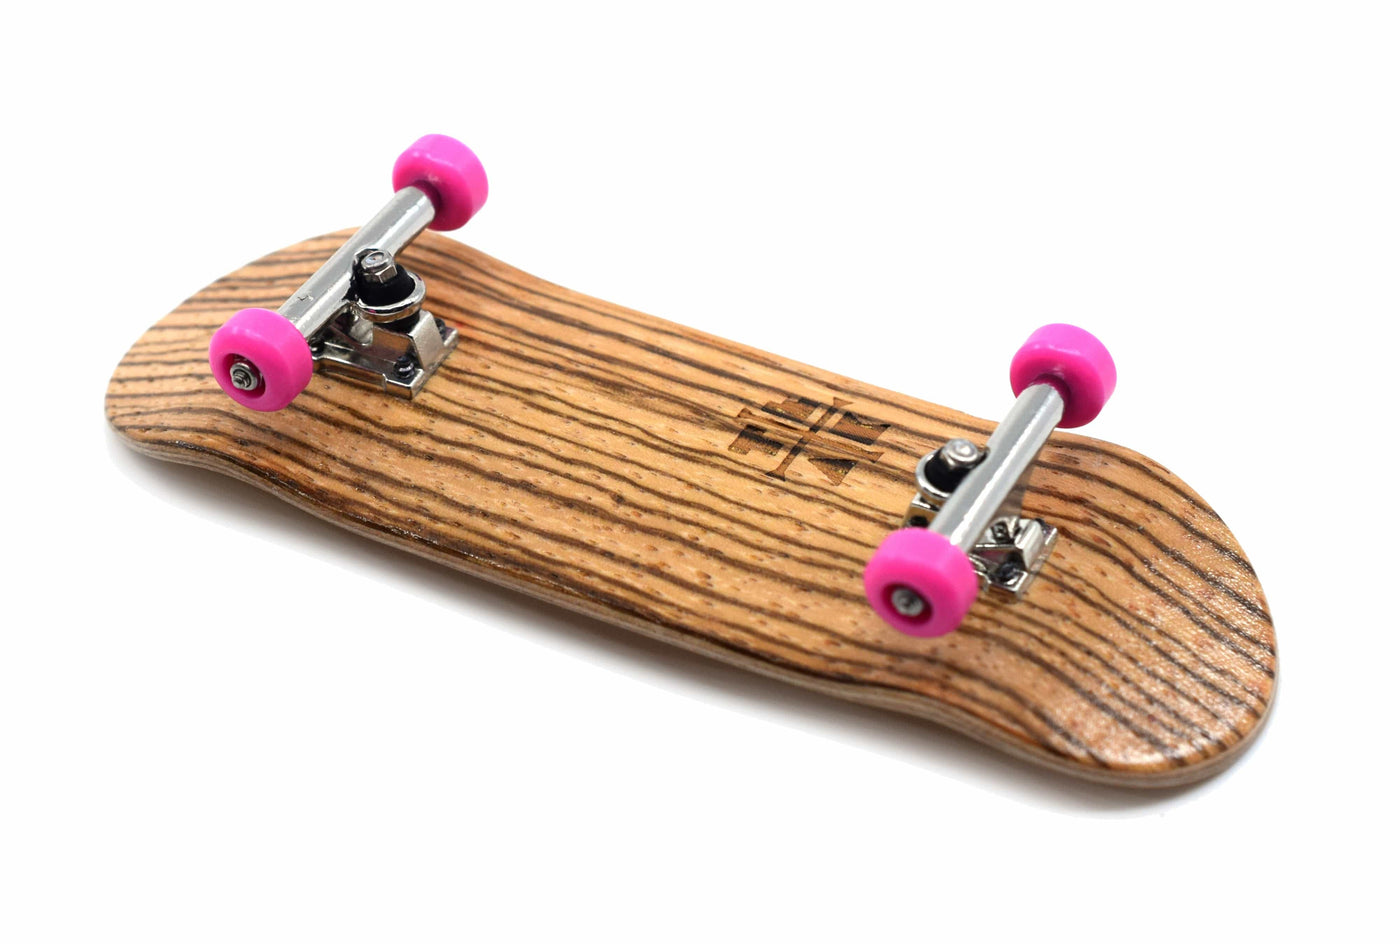 Teak Tuning PROlific Complete with Prodigy Trucks - "Pink Zebra" Edition